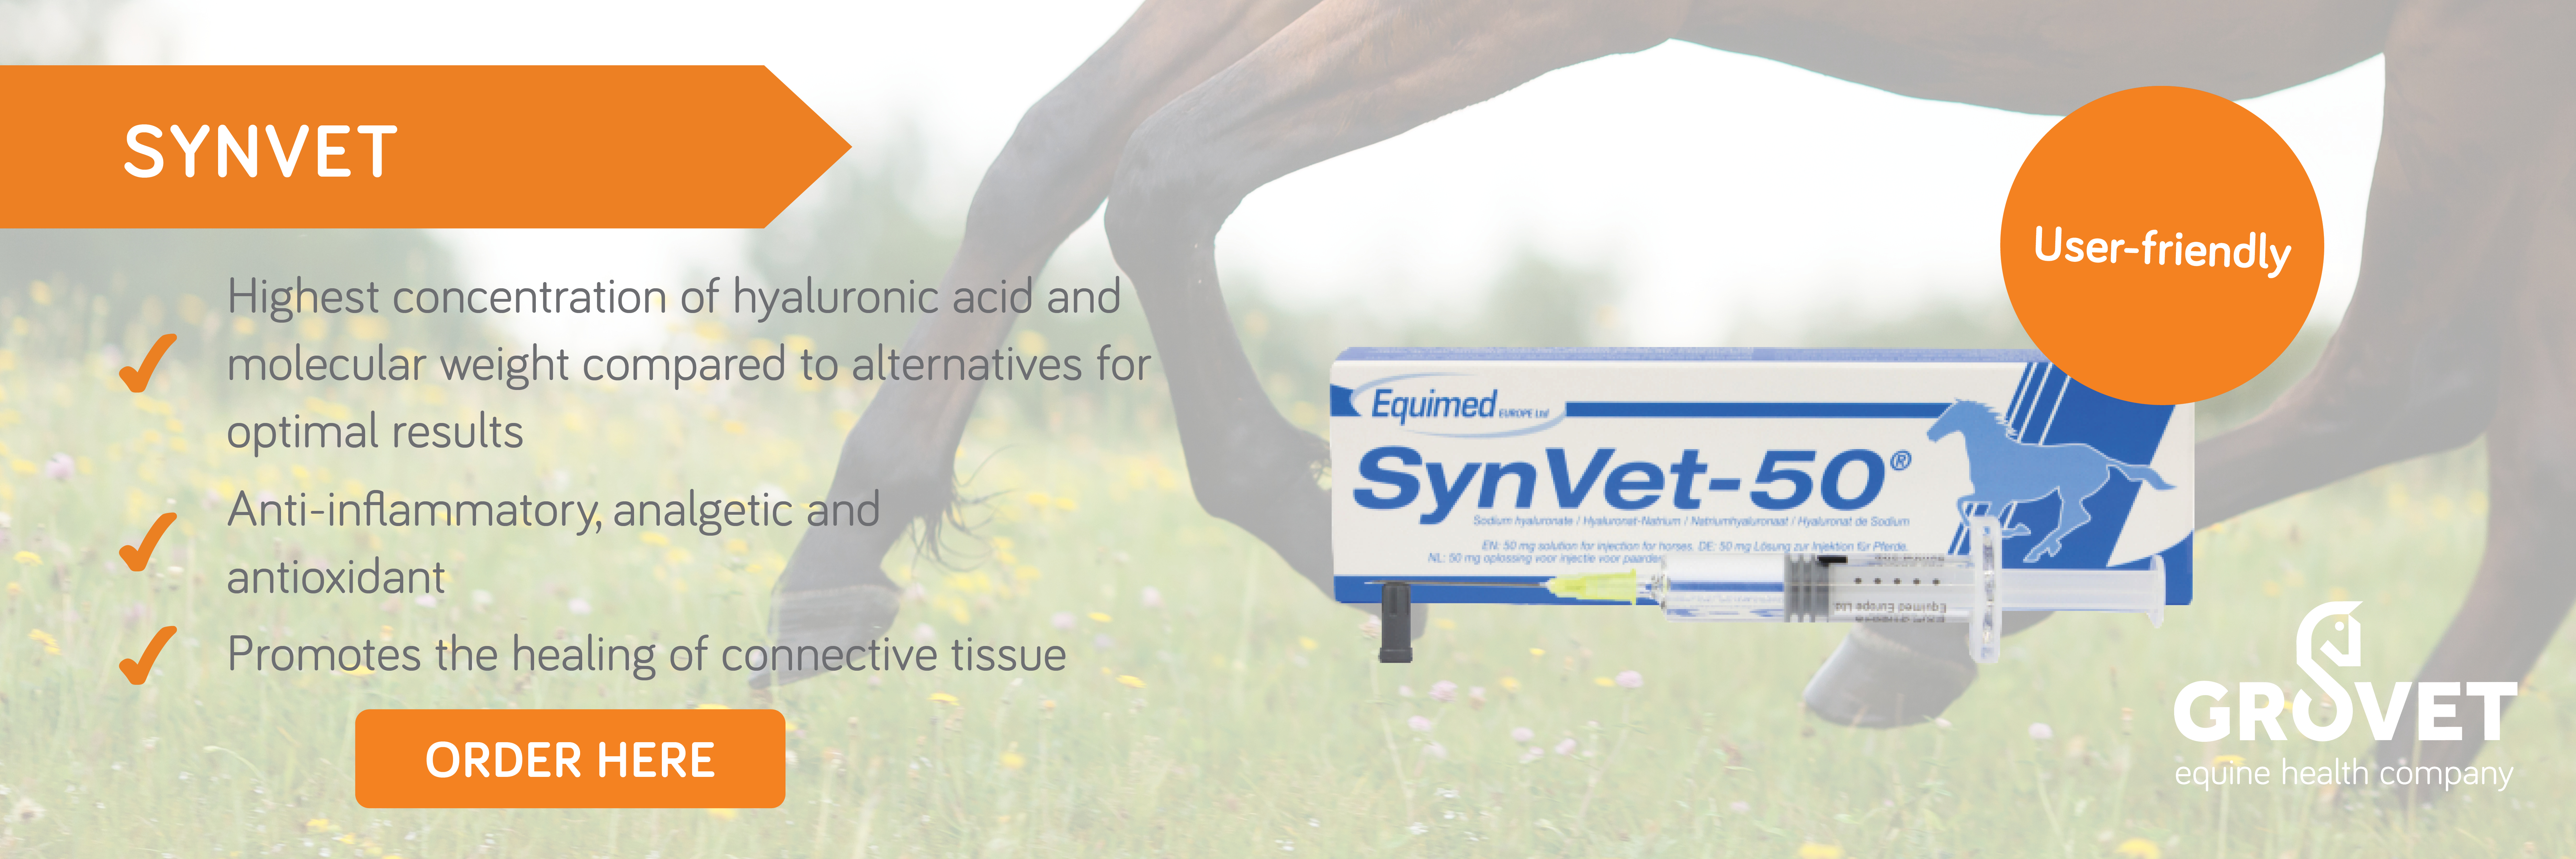 Synvet; promotes the healing of connective tissue